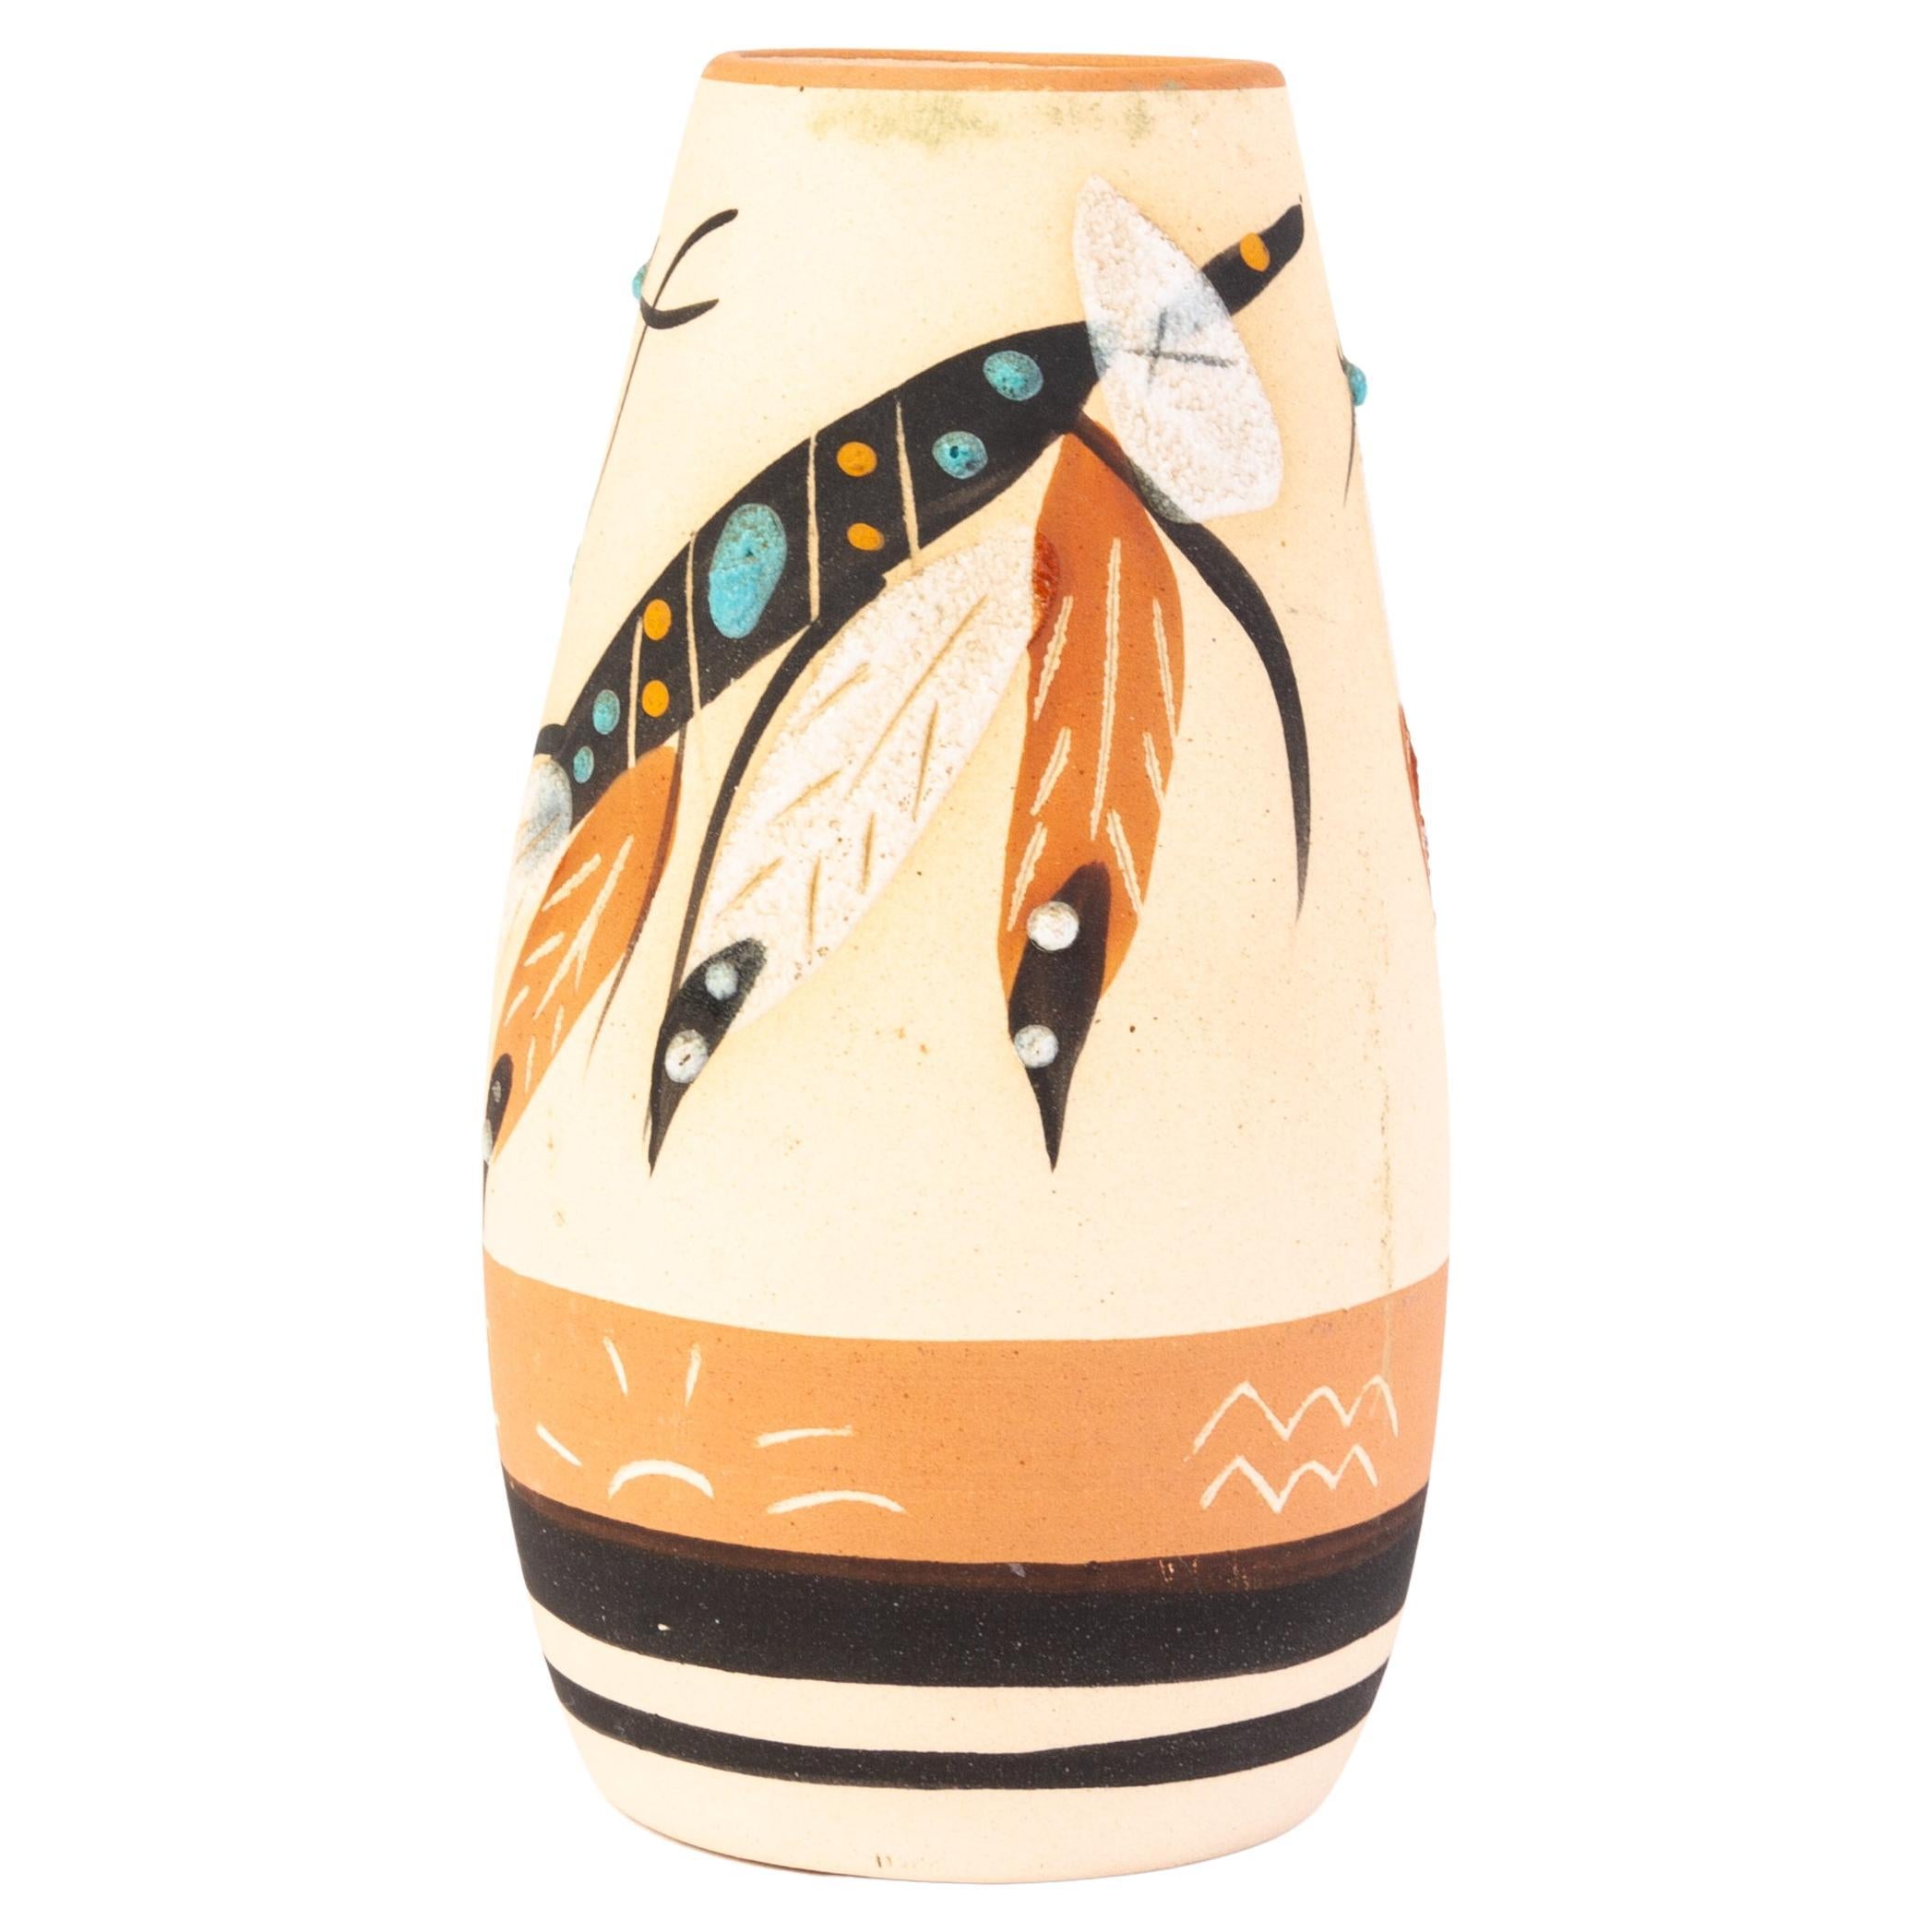 Signed Navajo Native American Indian Pottery Vase  For Sale